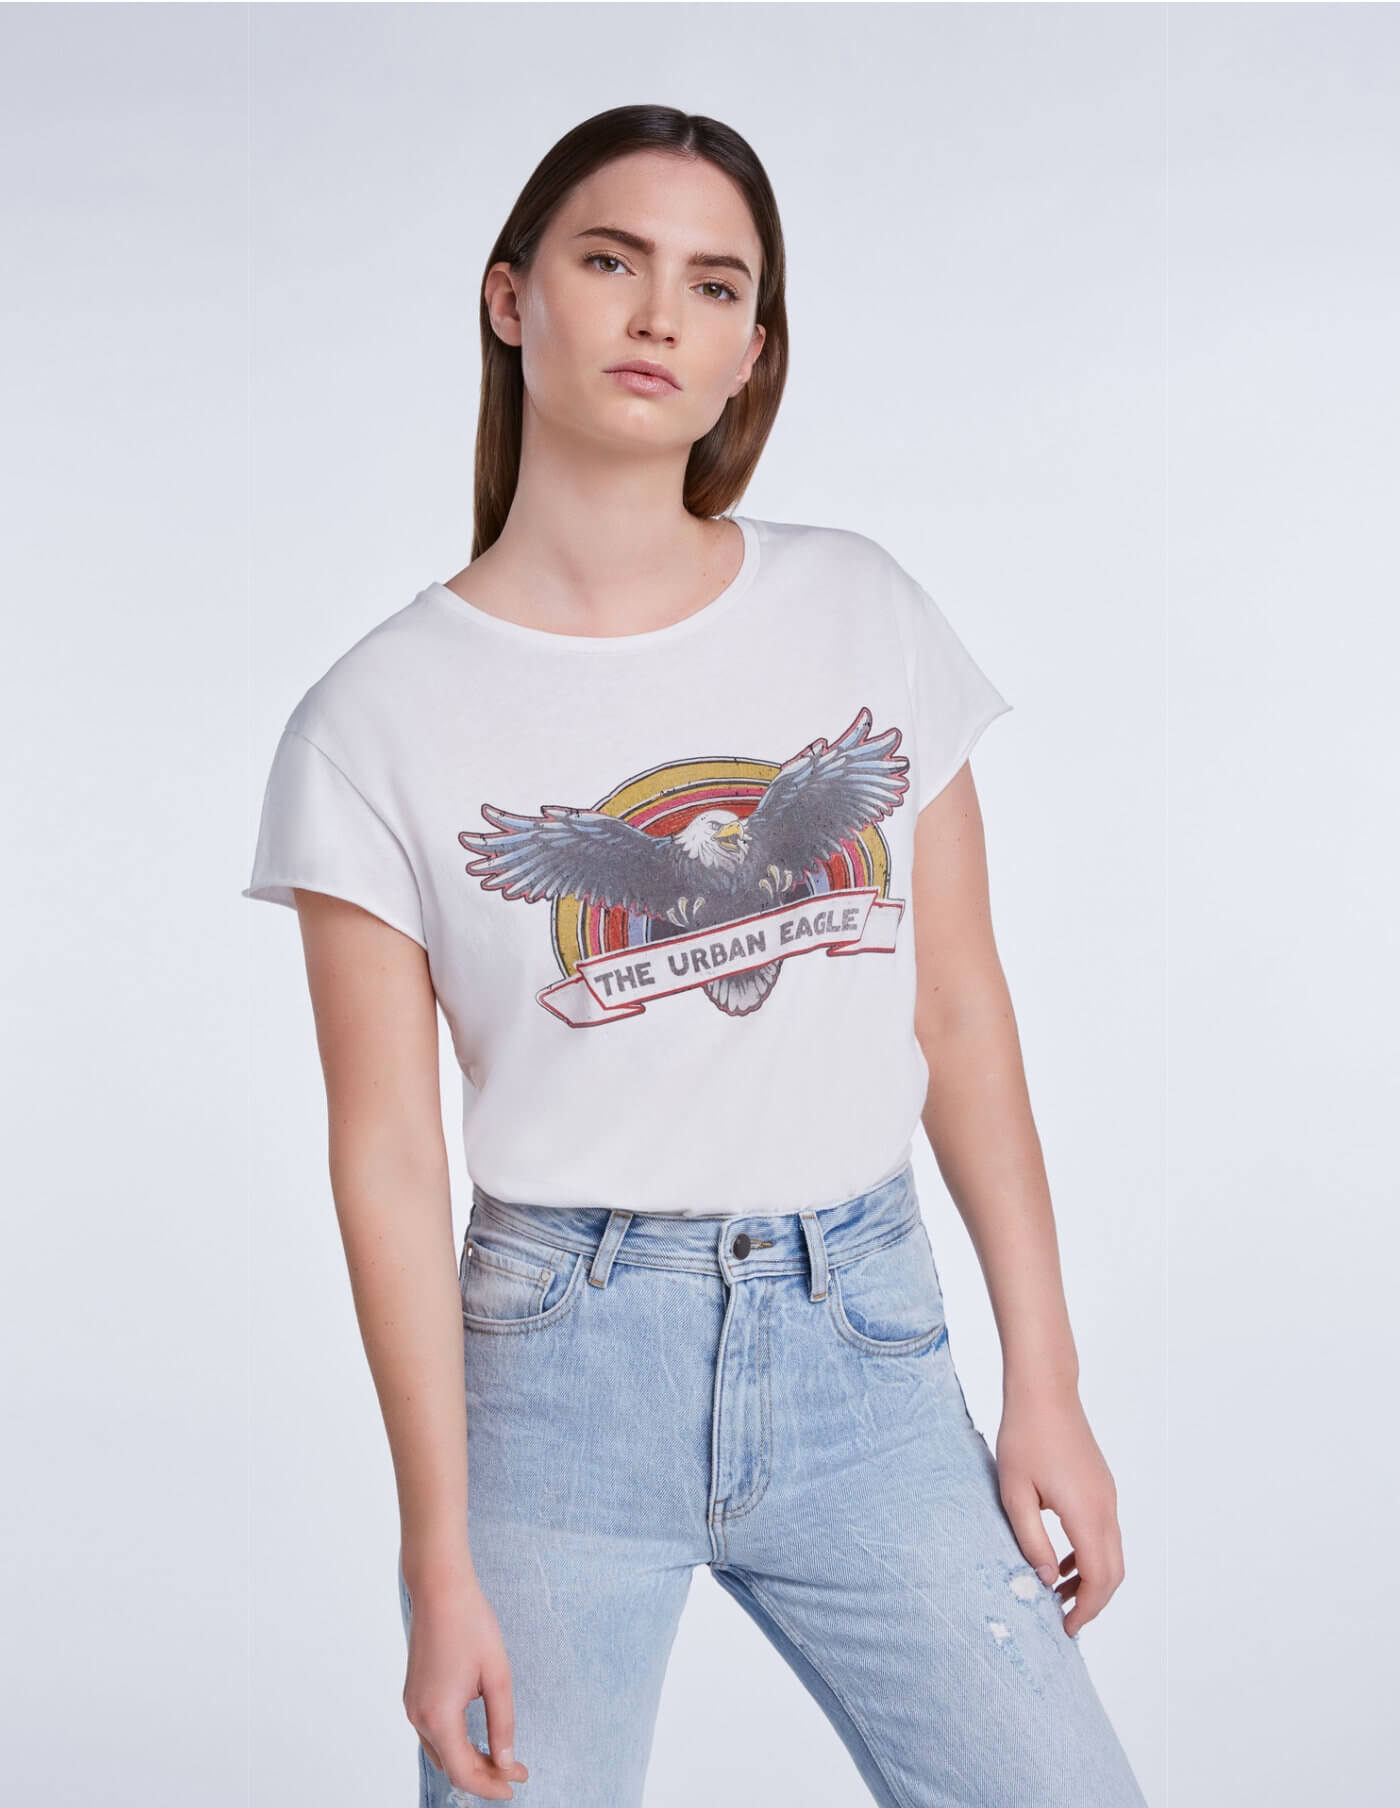 Set Rocky Band T-shirt In Cloud Dancer at Storm Fashion